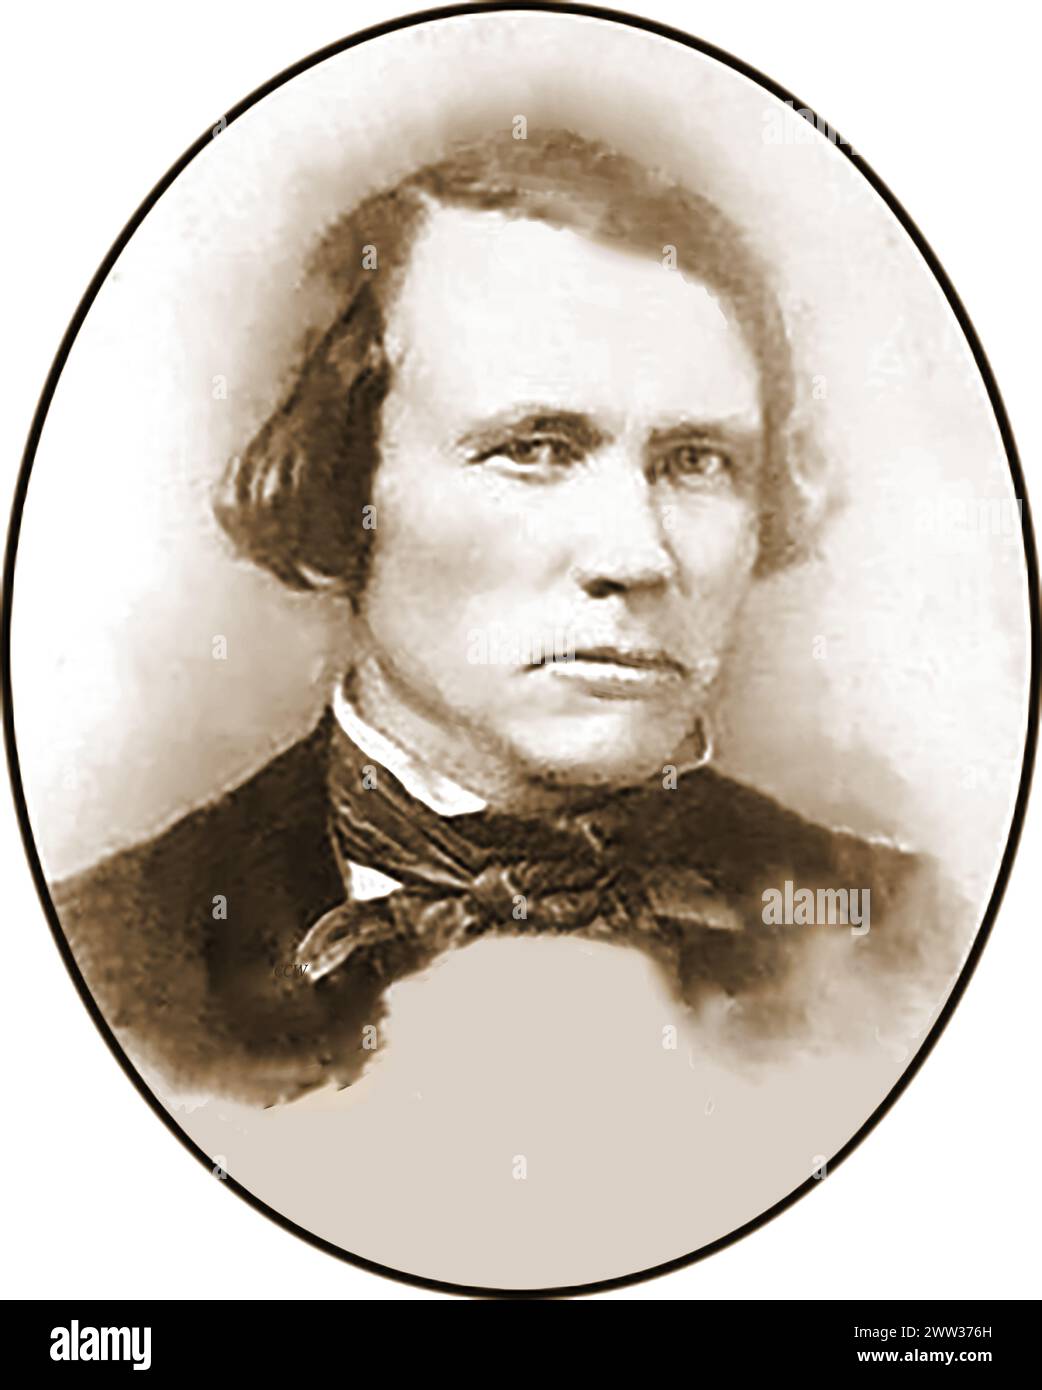 Kit Carson, U.S. army scout and pioneer. (Full name Christopher Houston Carso as a young man. Christopher Houston Carson1809 – 868) was an American frontiersman, a fur trapper, Indian agent, wilderness guide, and U.S. Army officer who became a legend in his own lifetime. He notoriously   led forces to suppress  many Indian tribes  tribes by destroying their food sources.  He was briefly Brigadier General and took command of Fort Garland, Colorado Stock Photo